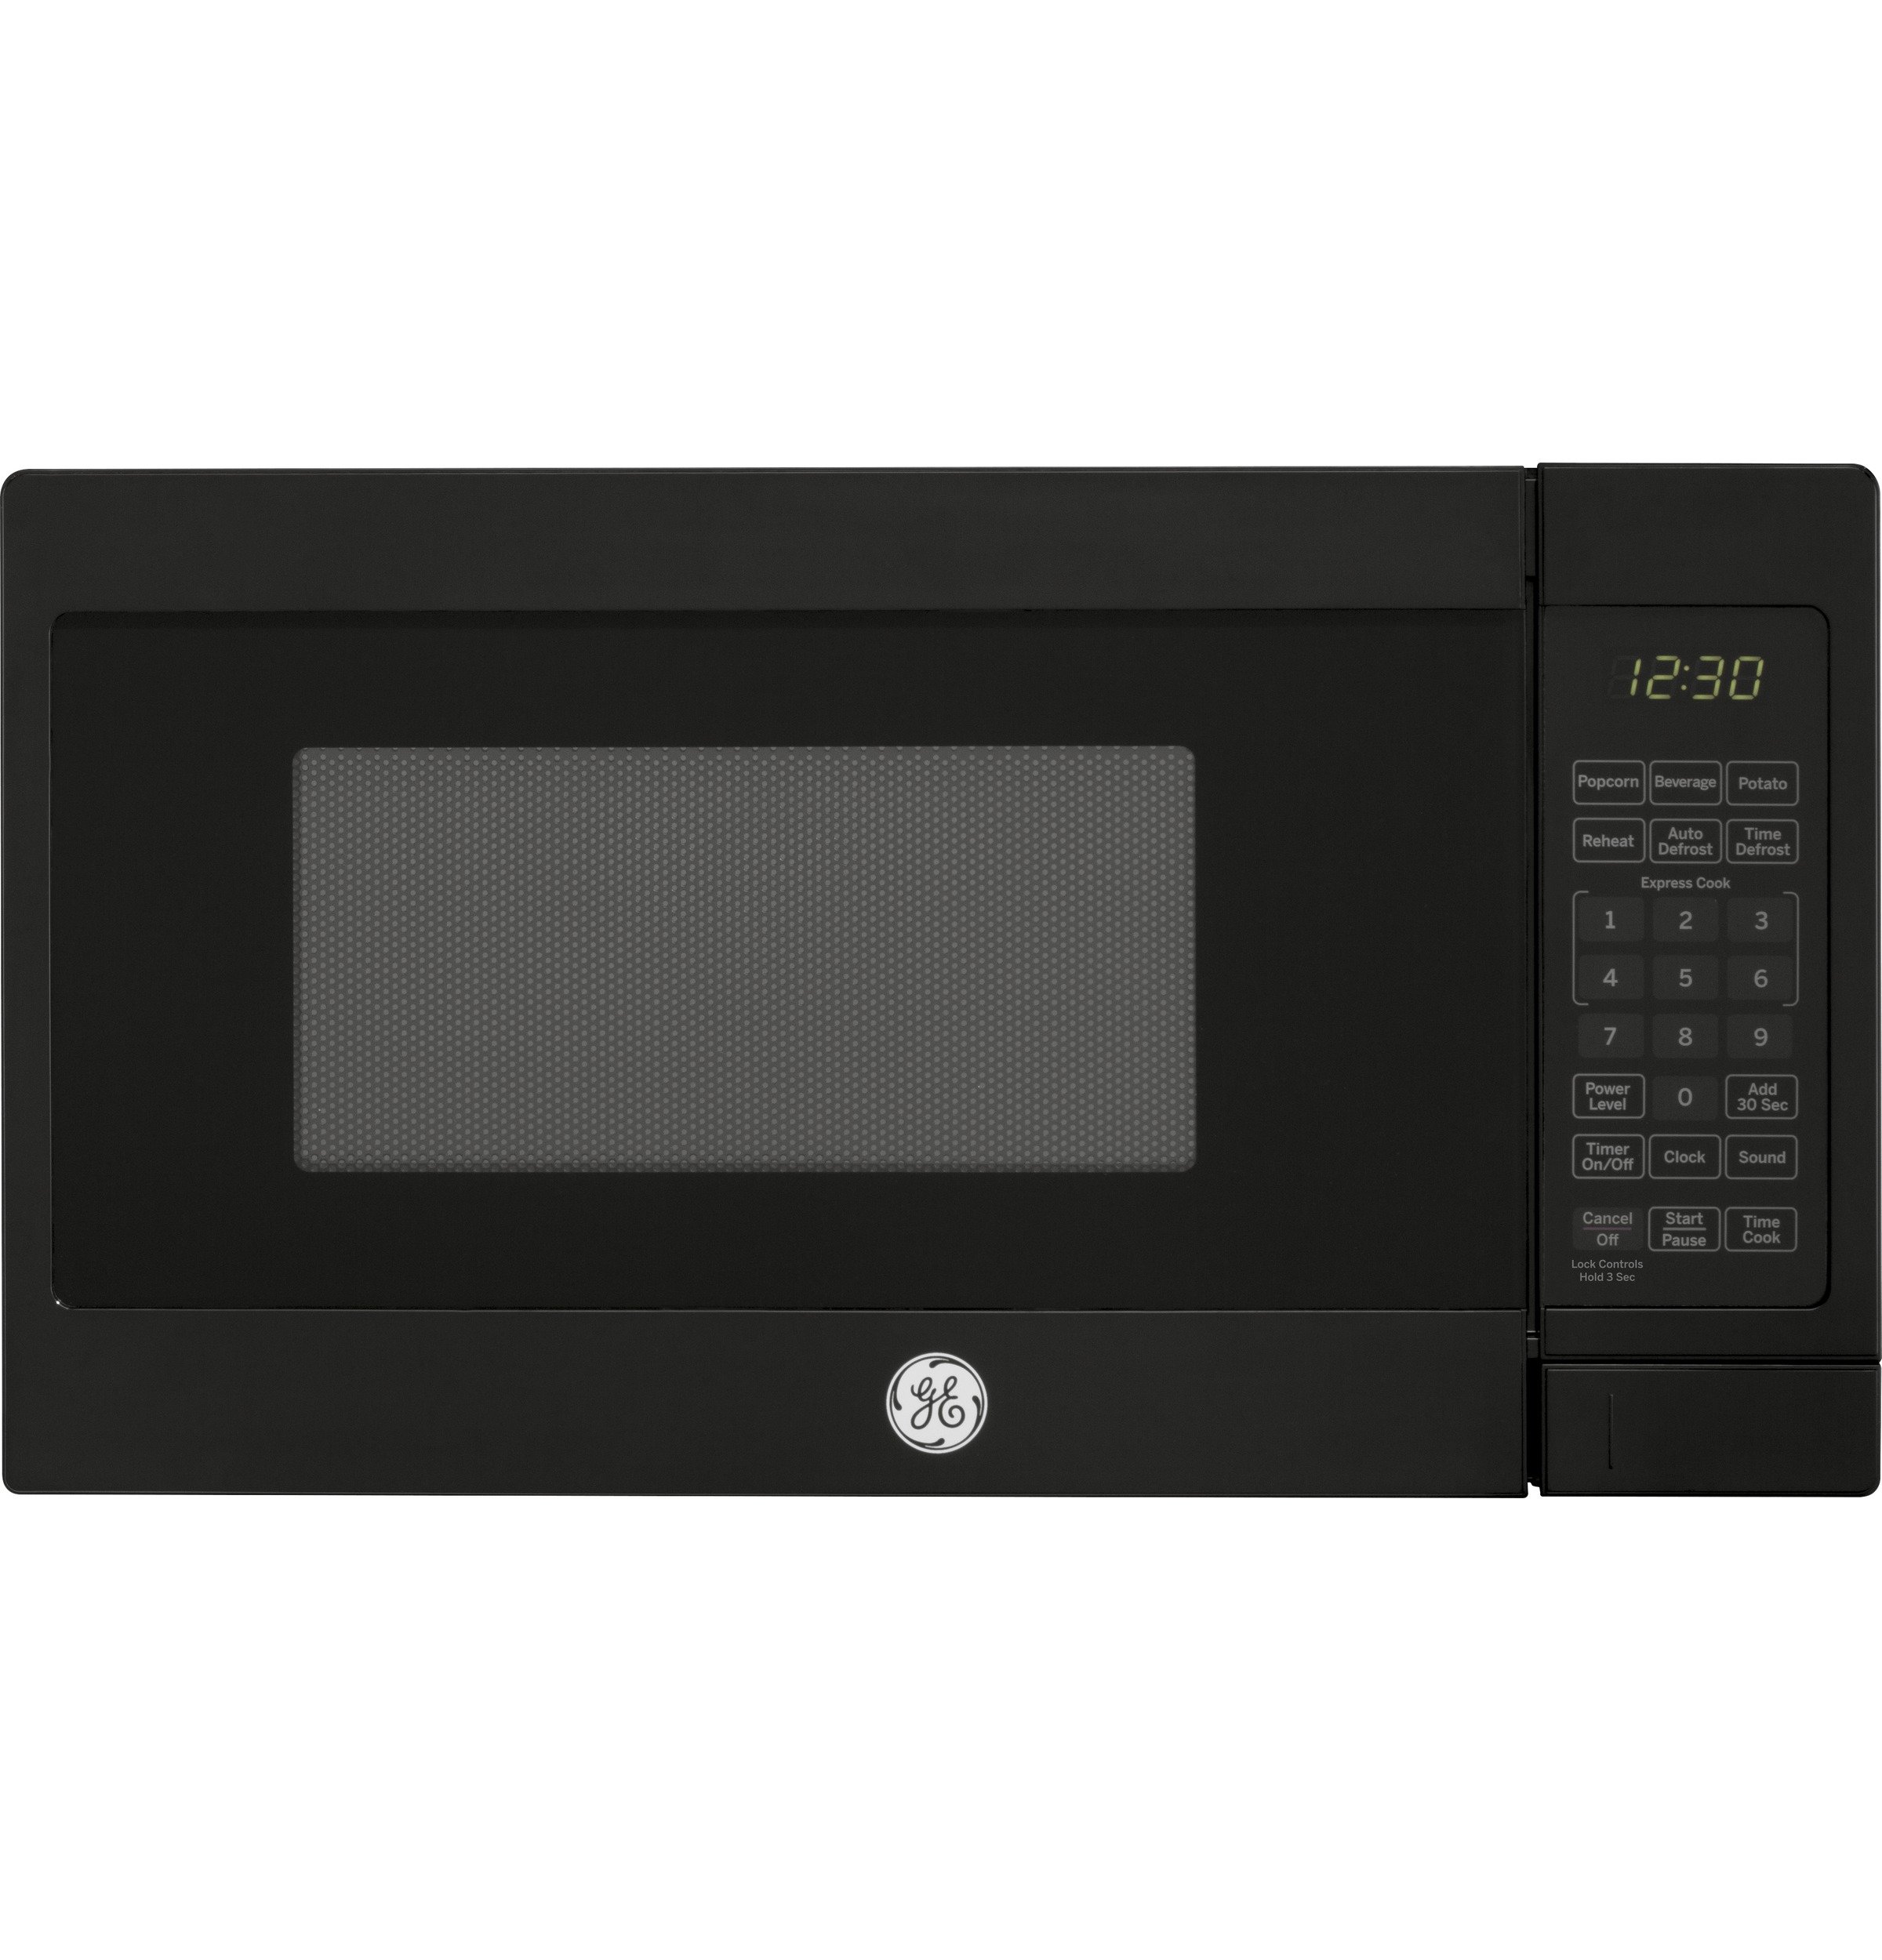 GE Countertop Microwave Oven | 0.7 Cubic Feet Capacity,...